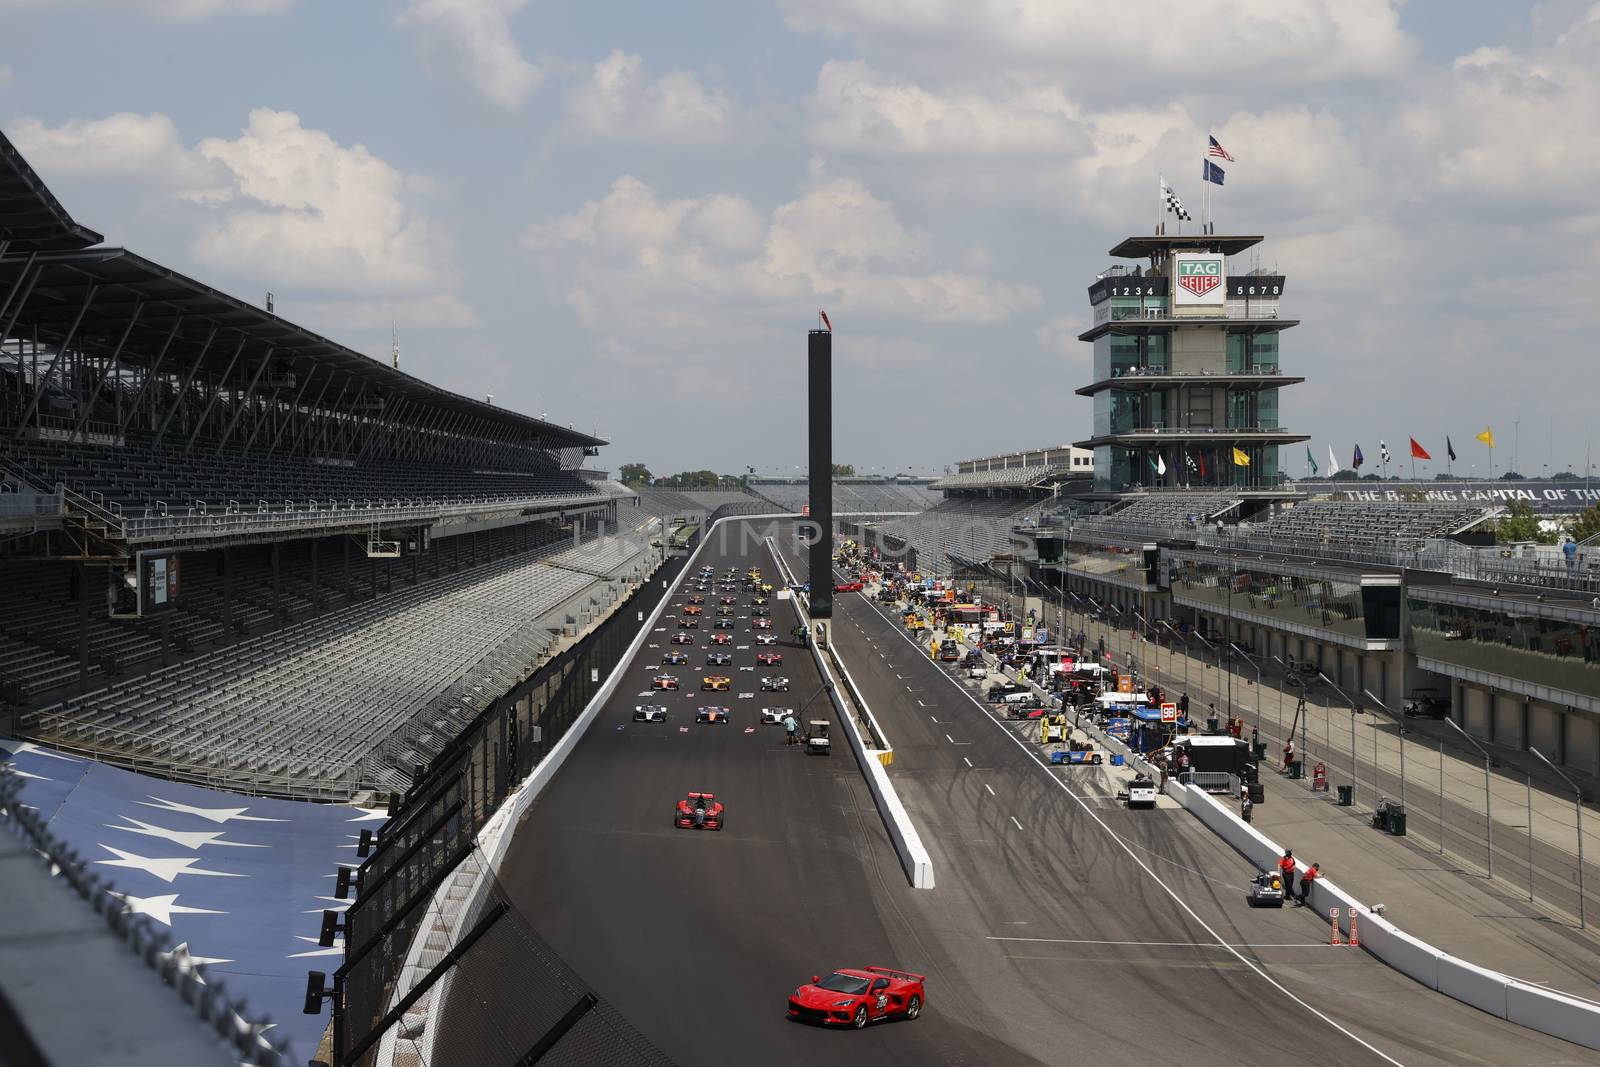 The green flag drops on the Indianapolis 500 at Indianapolis Motor Speedway in Indianapolis Indiana.